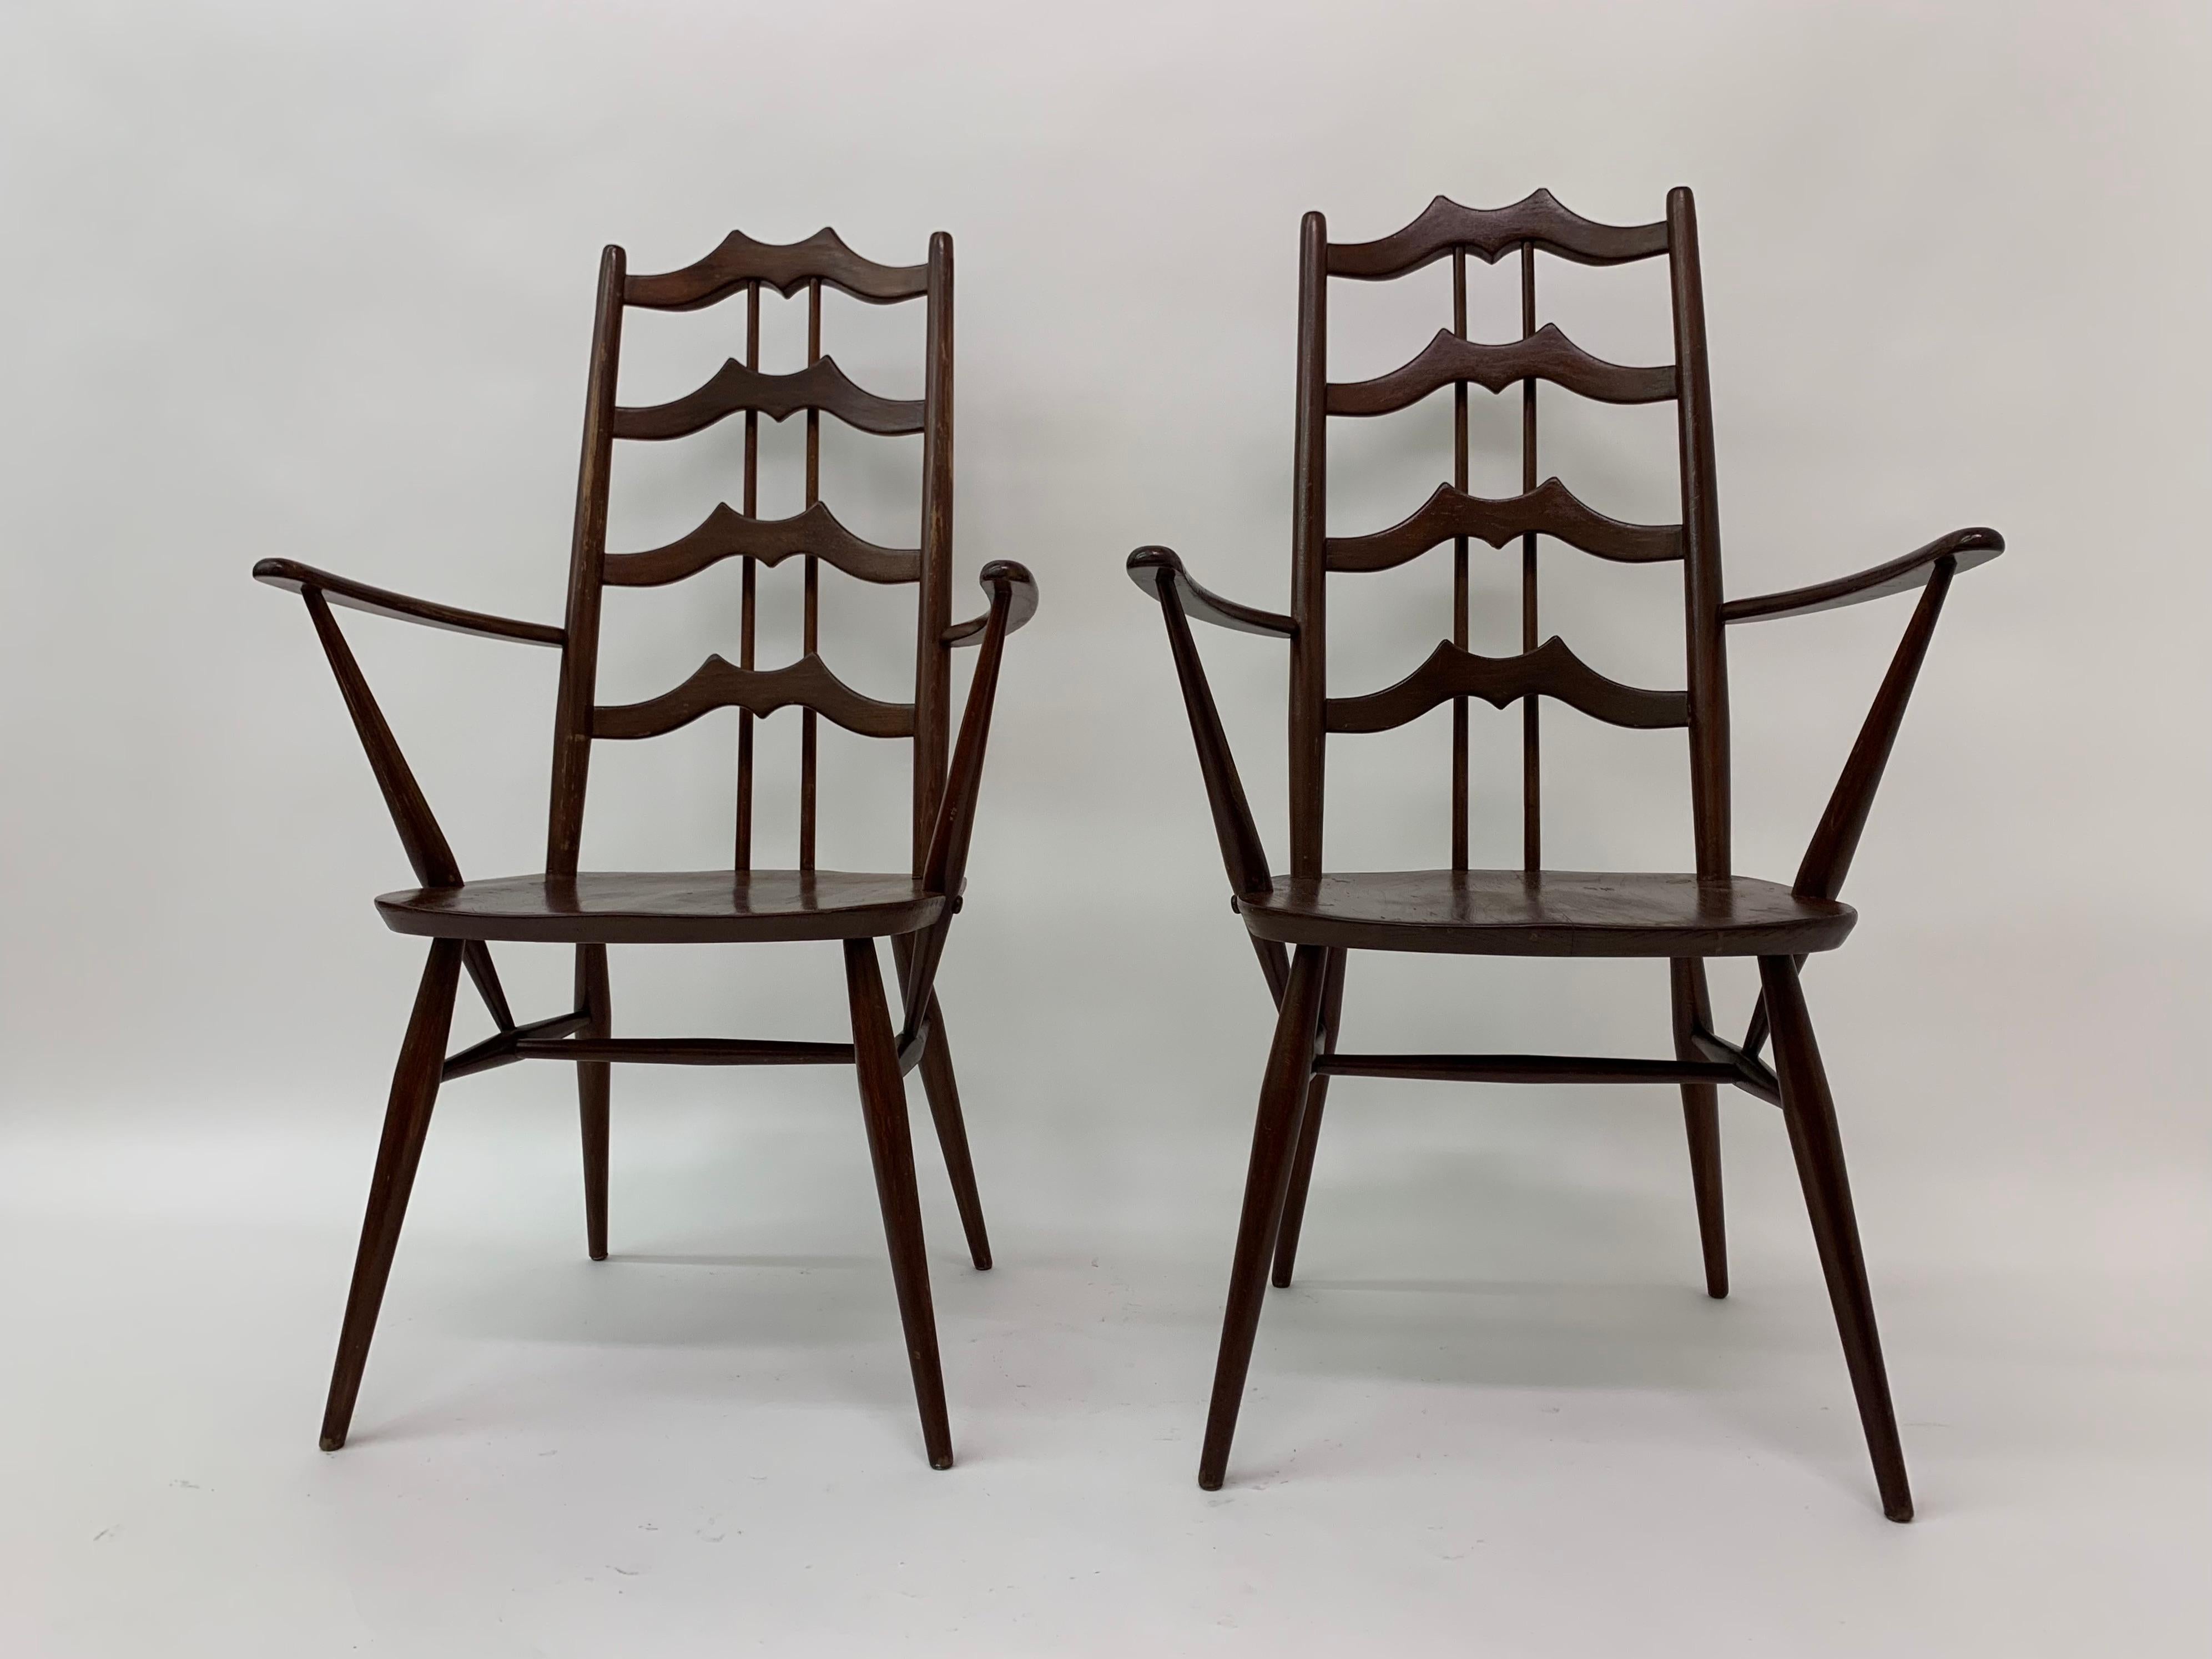 Condition: Good with patina signs of use
Material: Wood
Producer: Ercol
Designer:  Lucian Randolph Ercolani